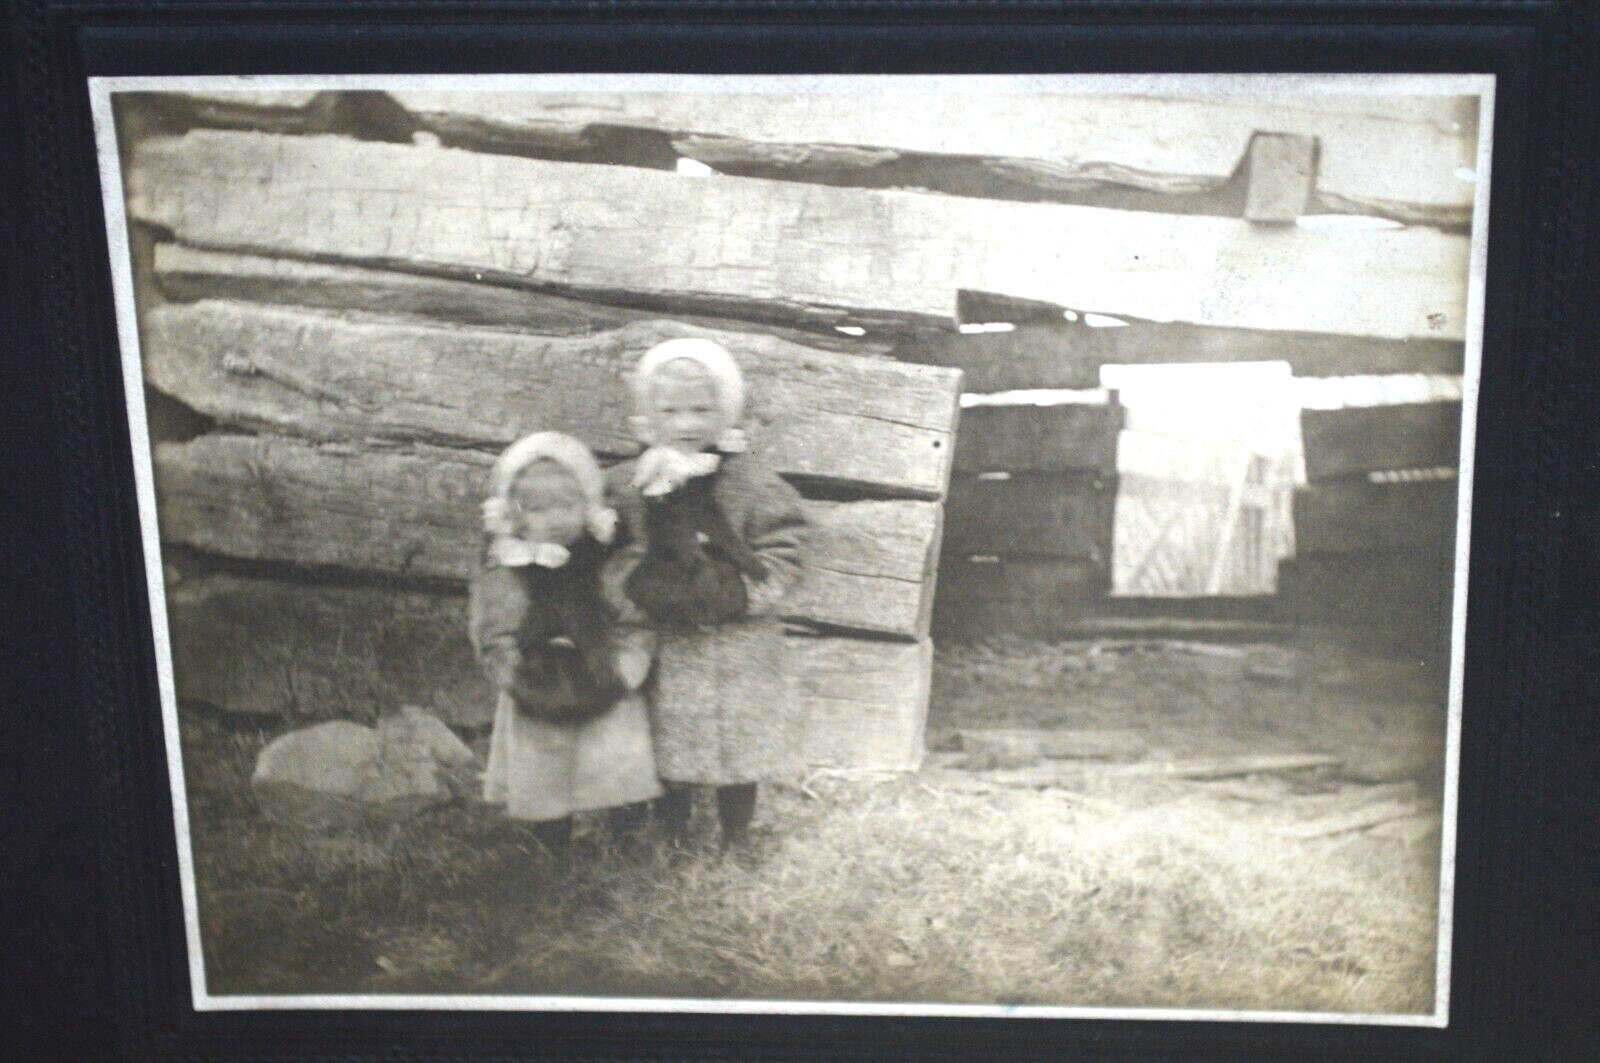 ANTIQUE EARLY 1880's-1900's PHOTOGRAPH KIDS BY WOOD BUILDING 5X4